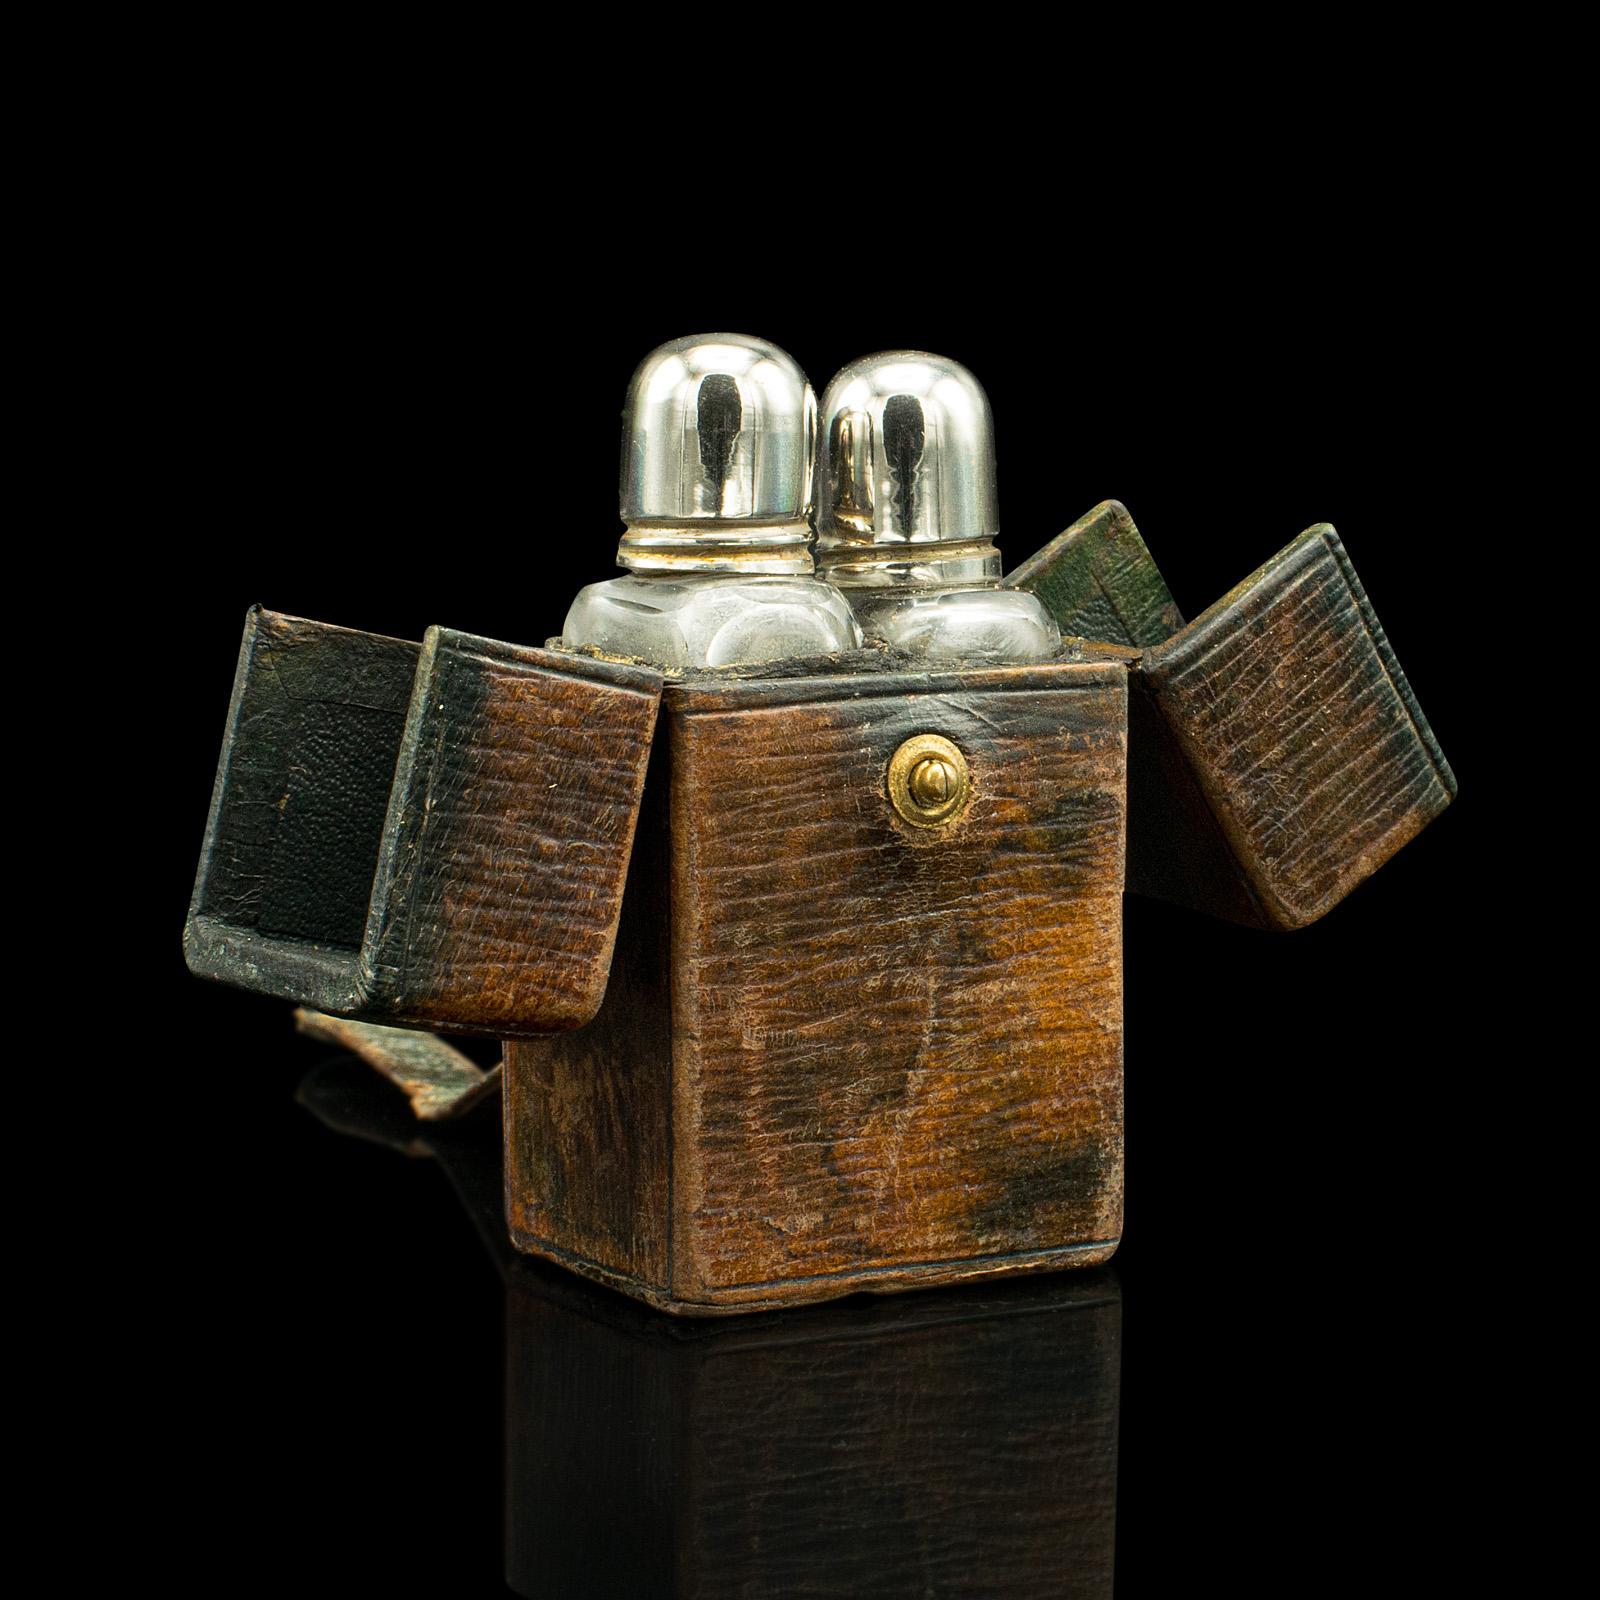 This is a small antique travelling perfume case. An English, leather and glass bottle holder, in the manner of Asprey, dating to the Victorian period, circa 1850.

Petite and charming, with an appealing time worn look
Displays a desirable aged